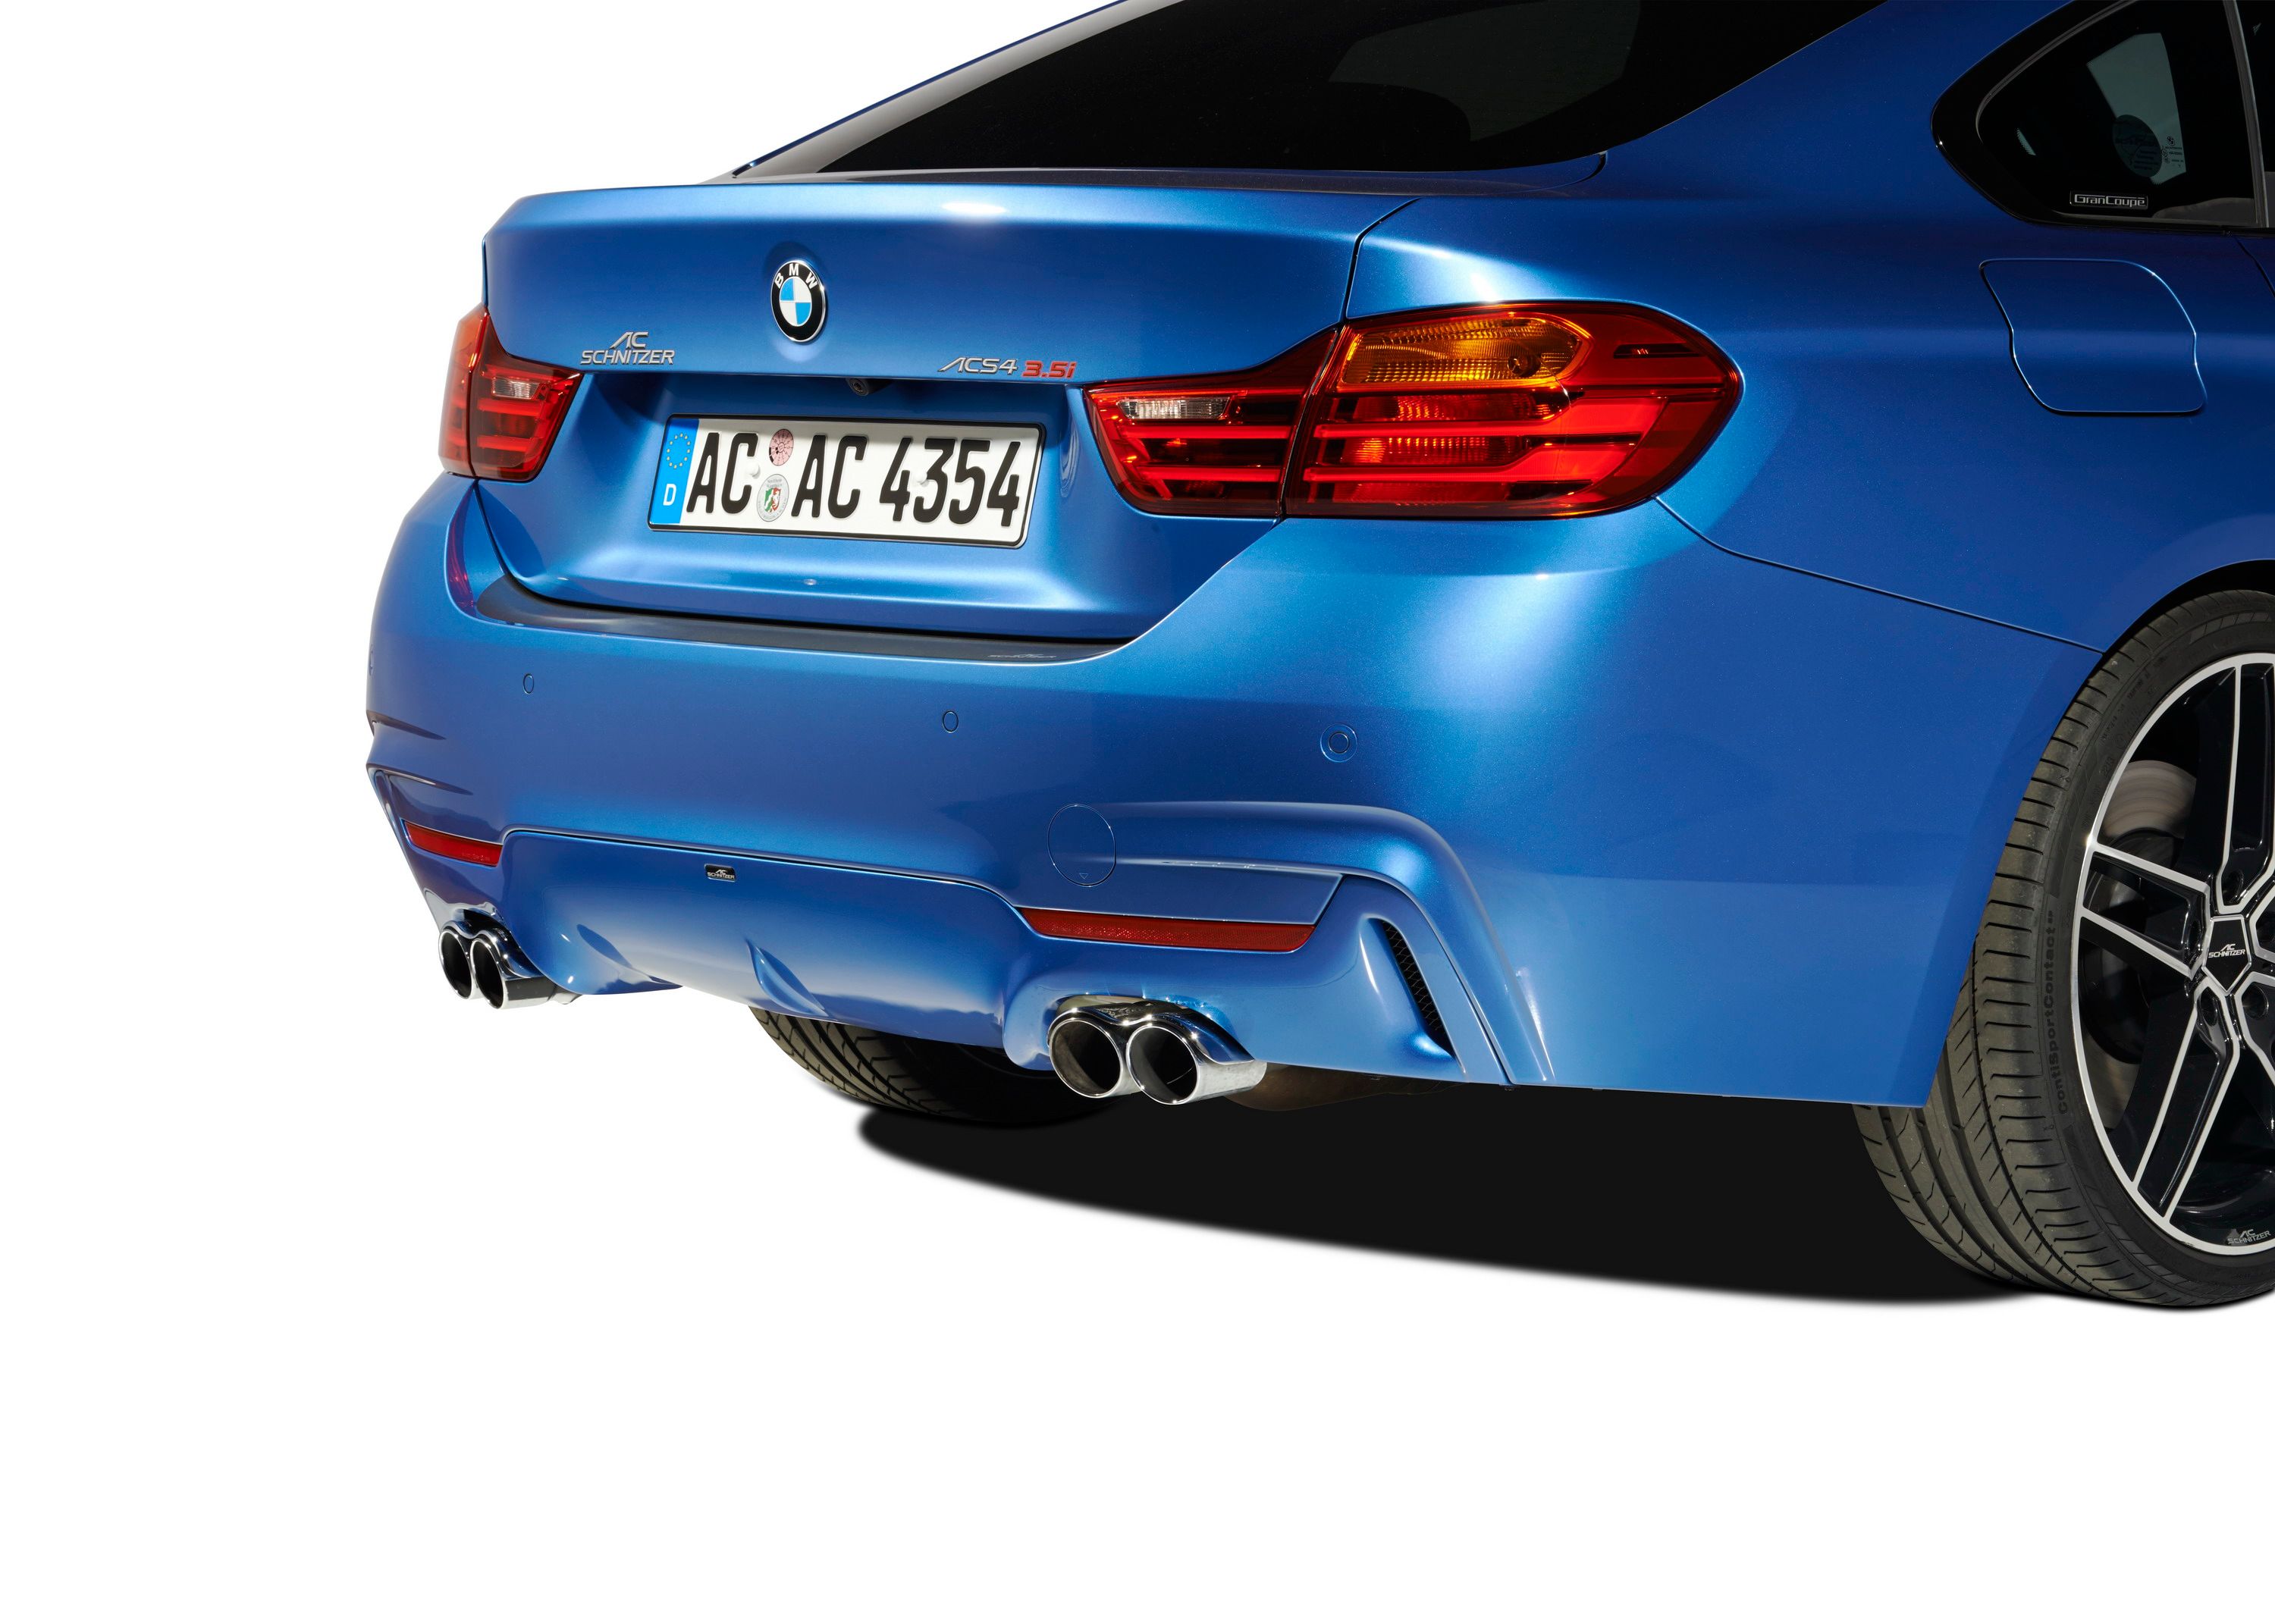 2014 BMW 4 Series Gran Coupe By AC Schnitzer